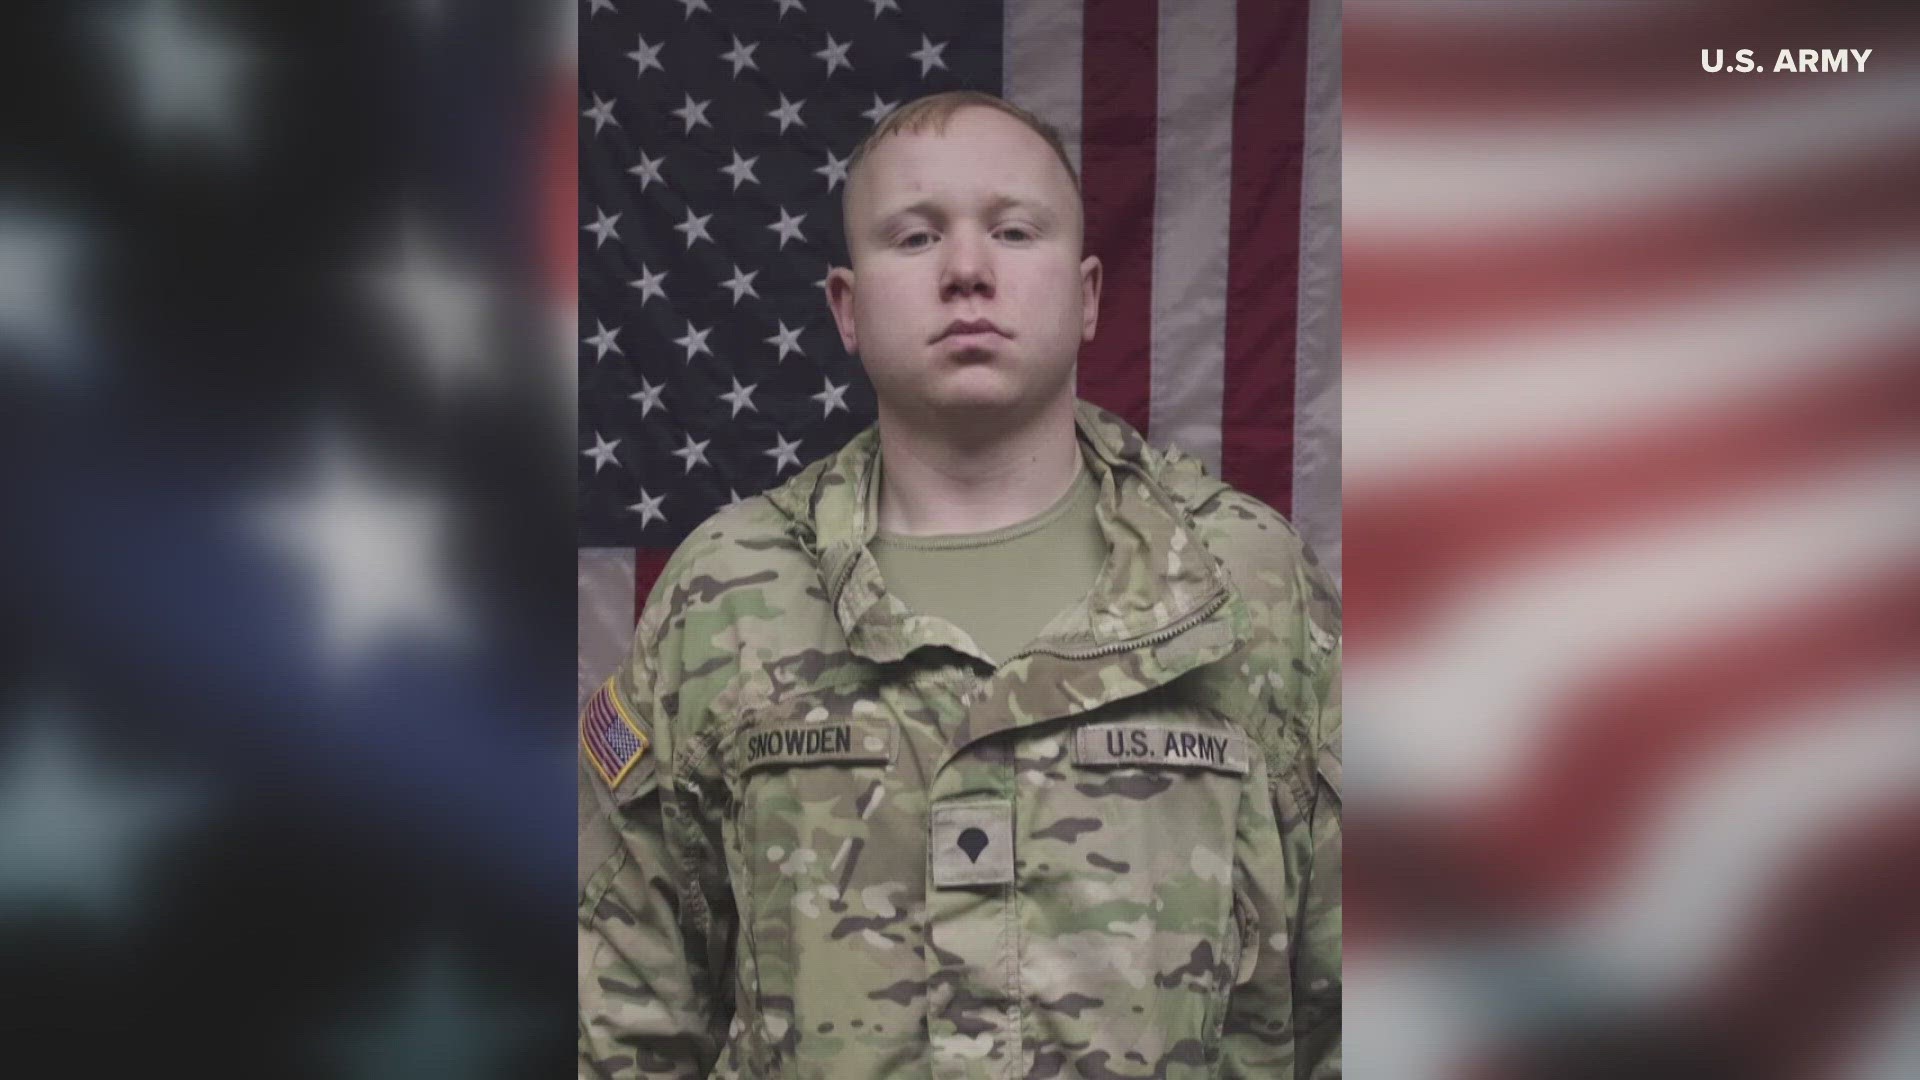 A man from Franklin County, Missouri, was among two U.S. Army soldiers killed Monday when a military vehicle crashed in Alaska. Two soldiers were killed and 12 hurt.